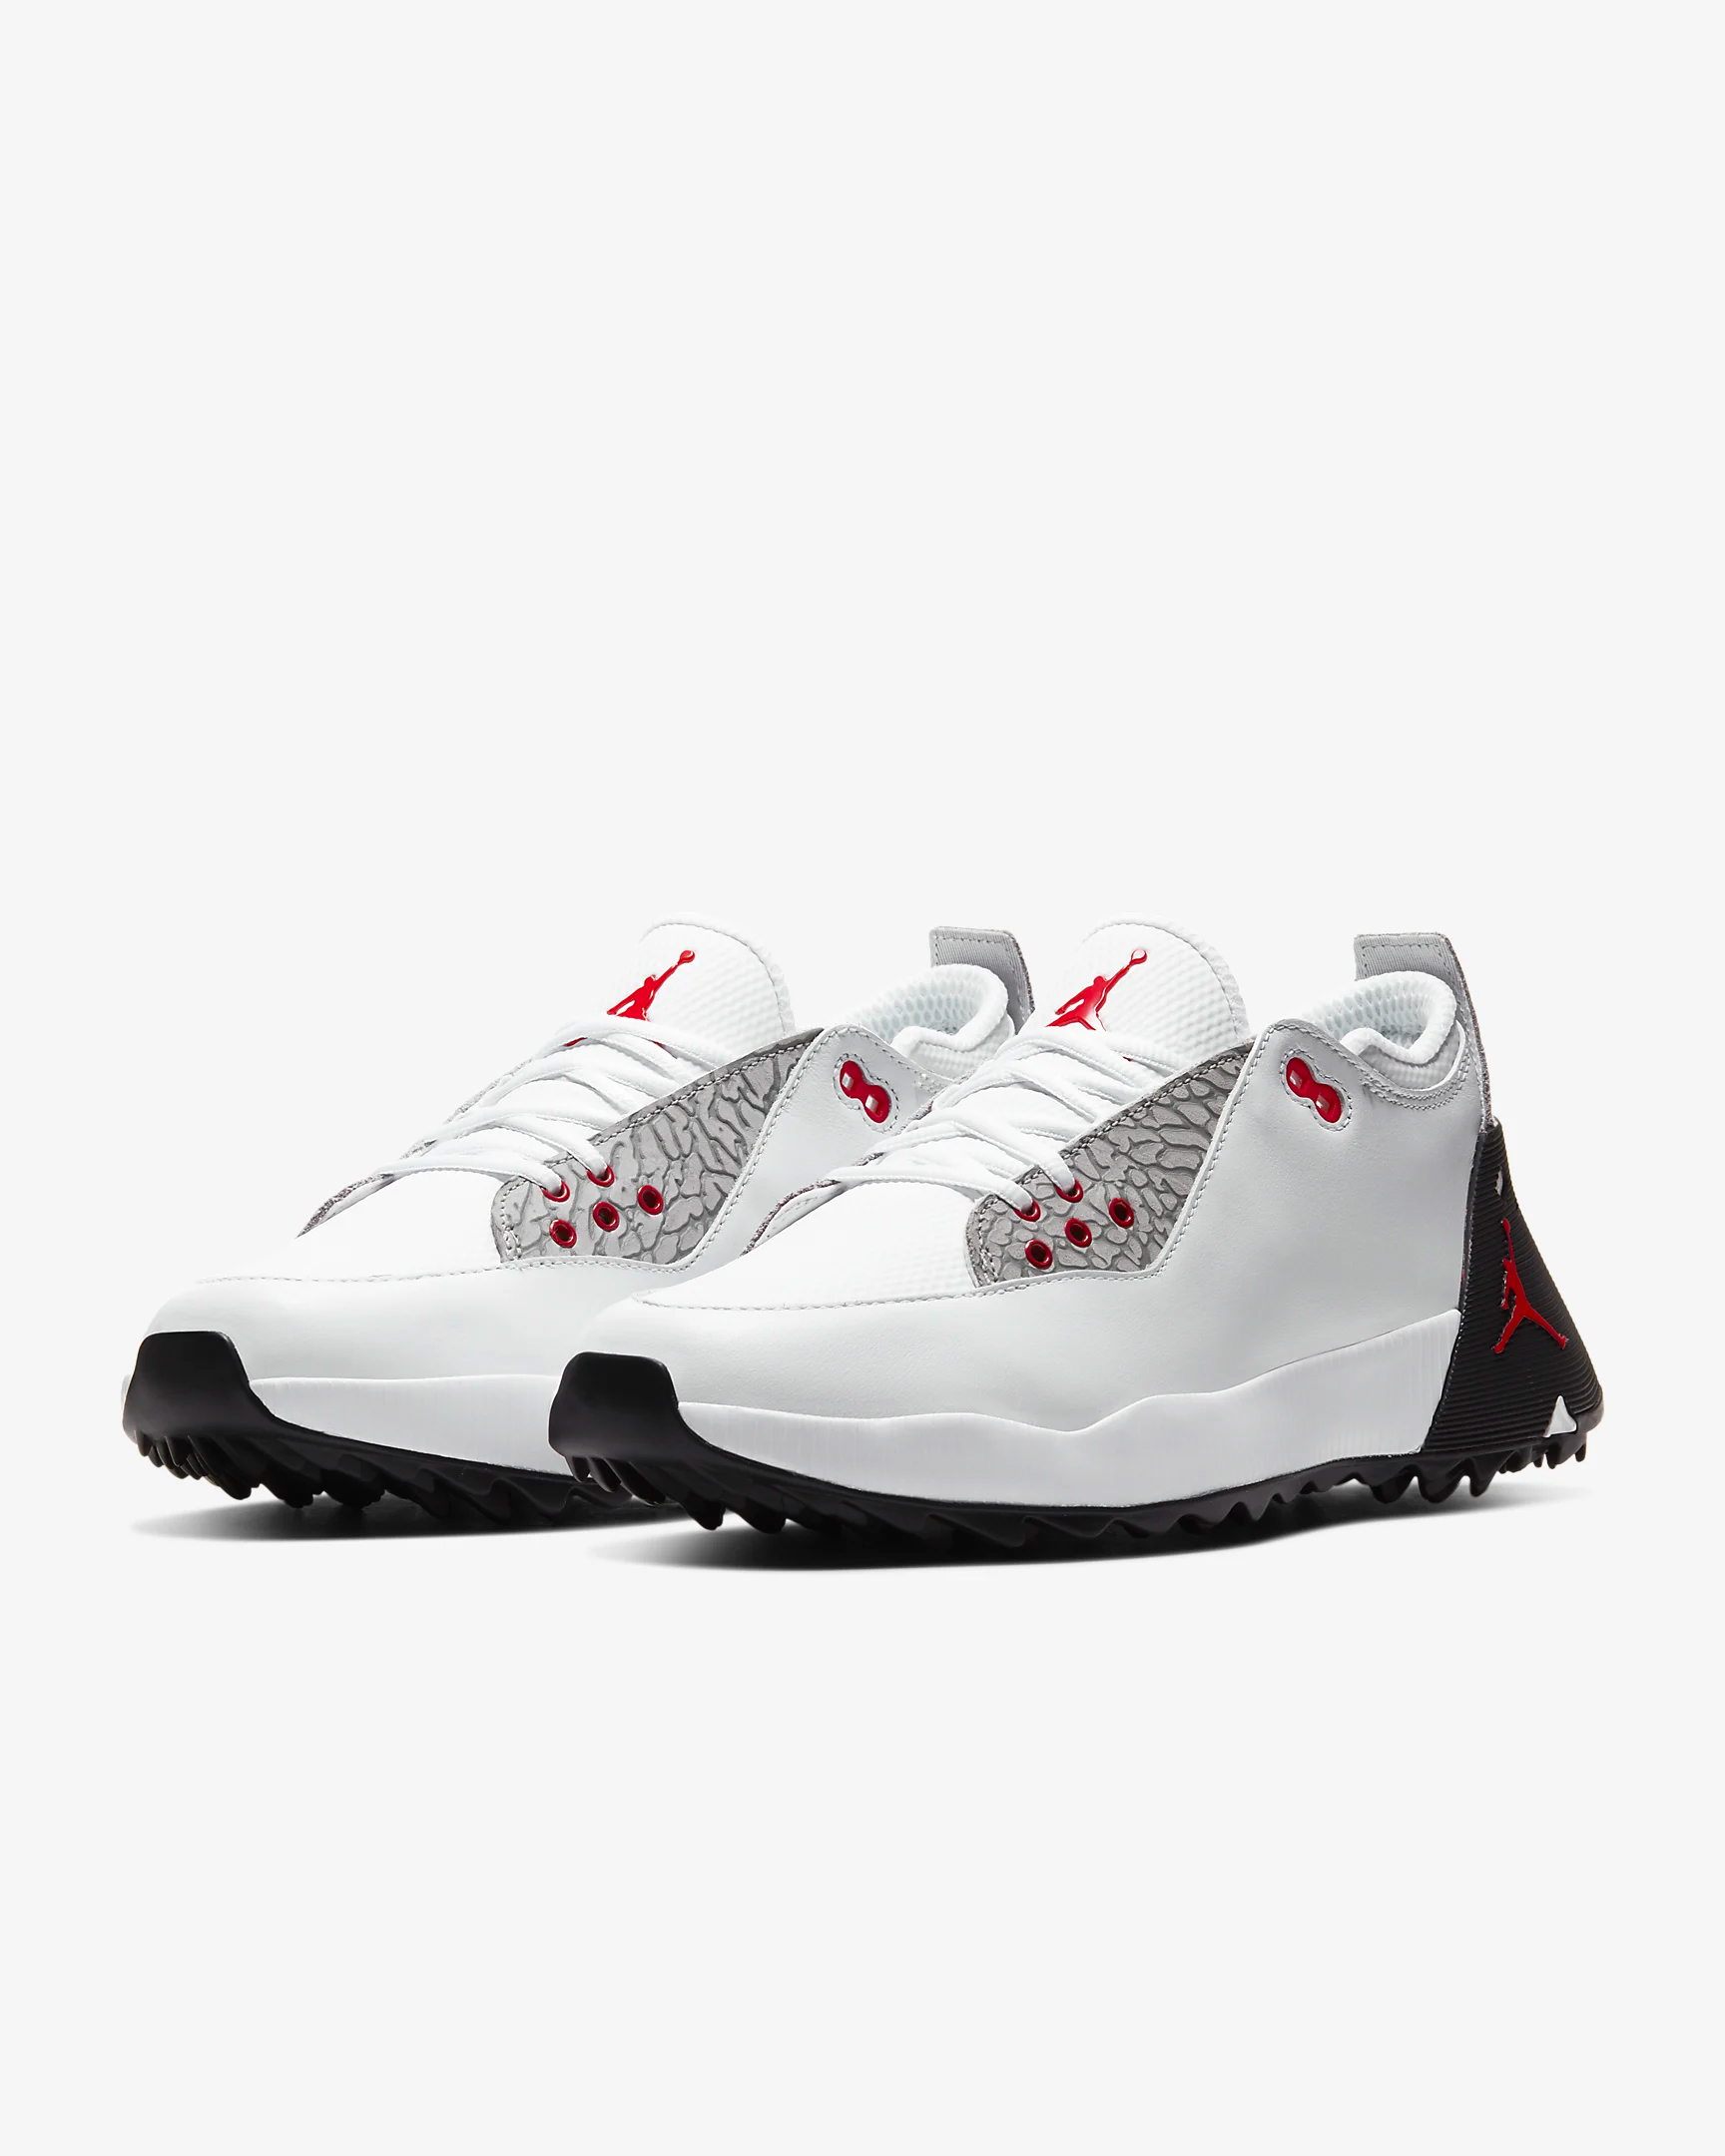 jordan golf shoes with spikes